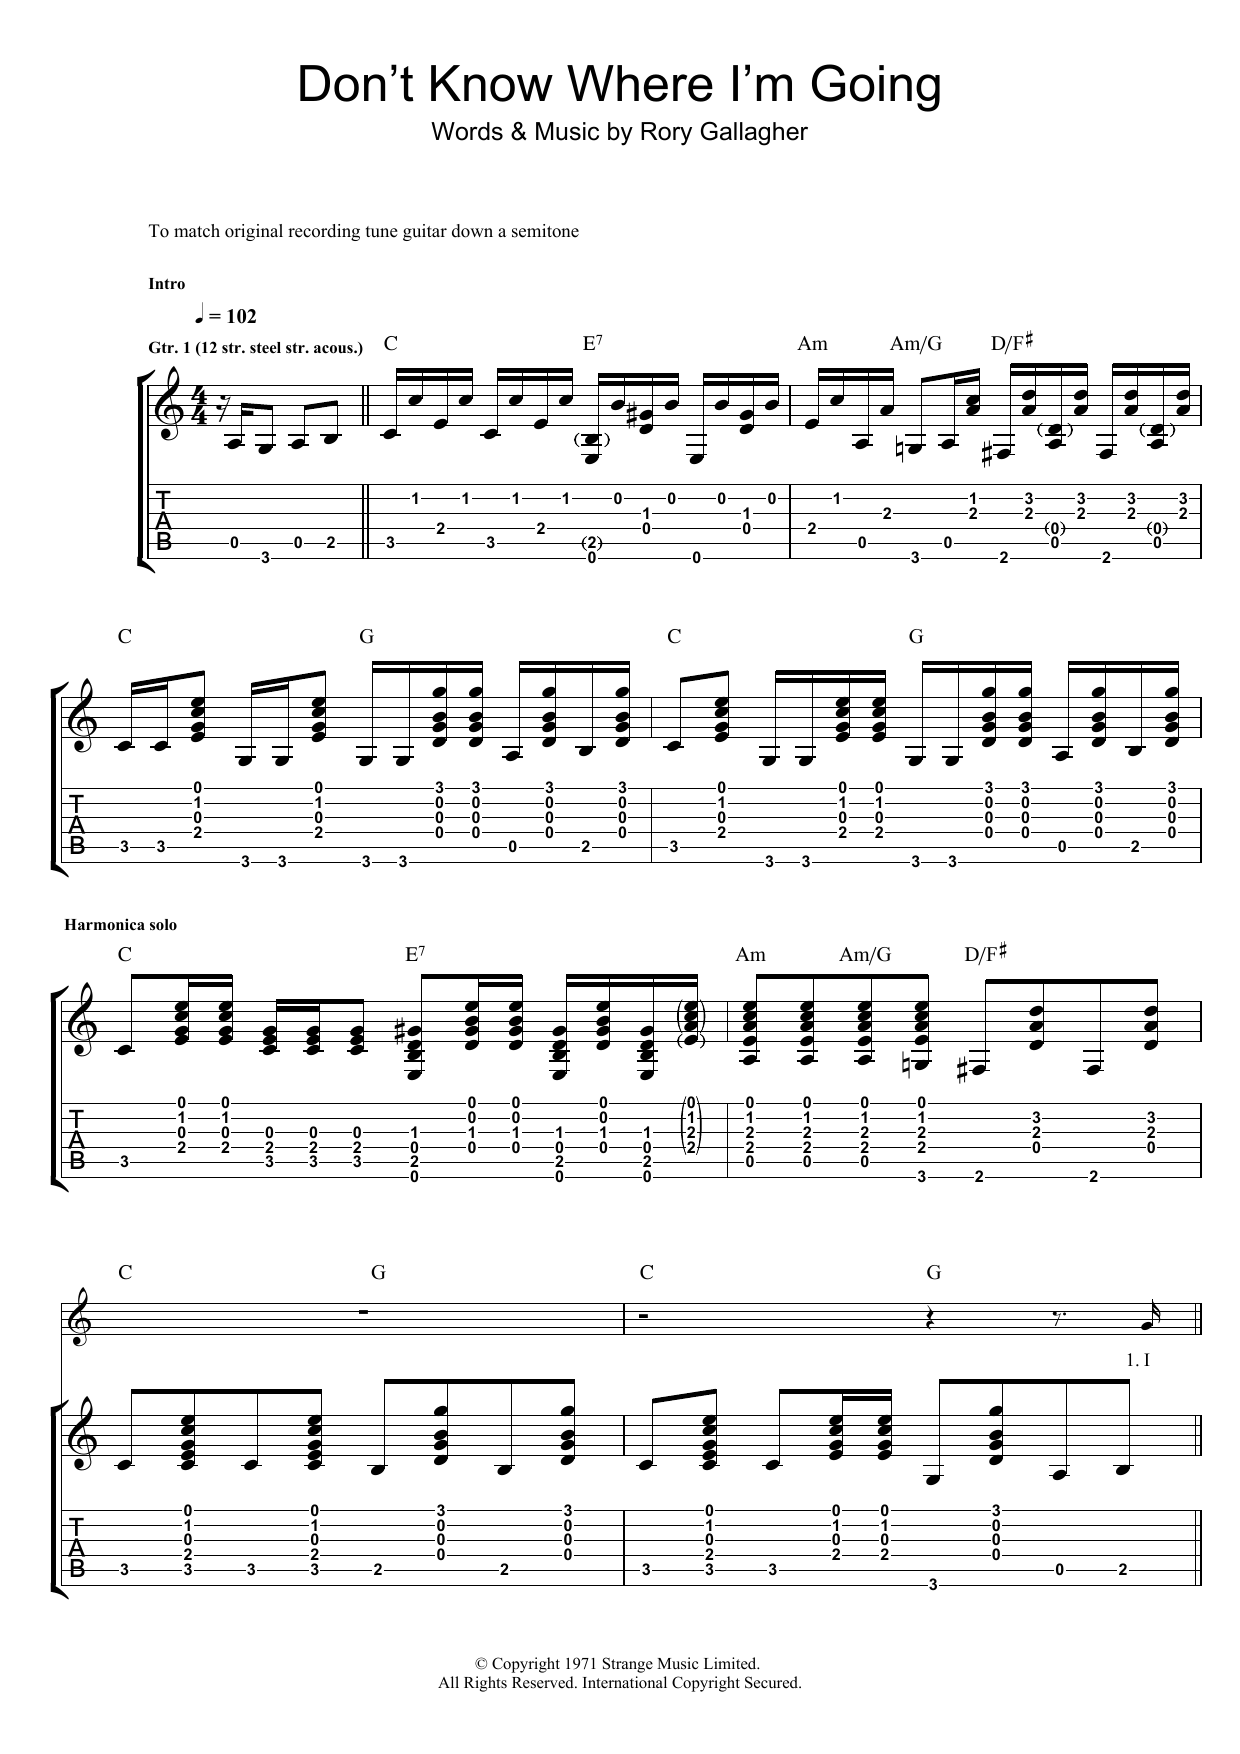 Download Rory Gallagher Don't Know Where I'm Going Sheet Music